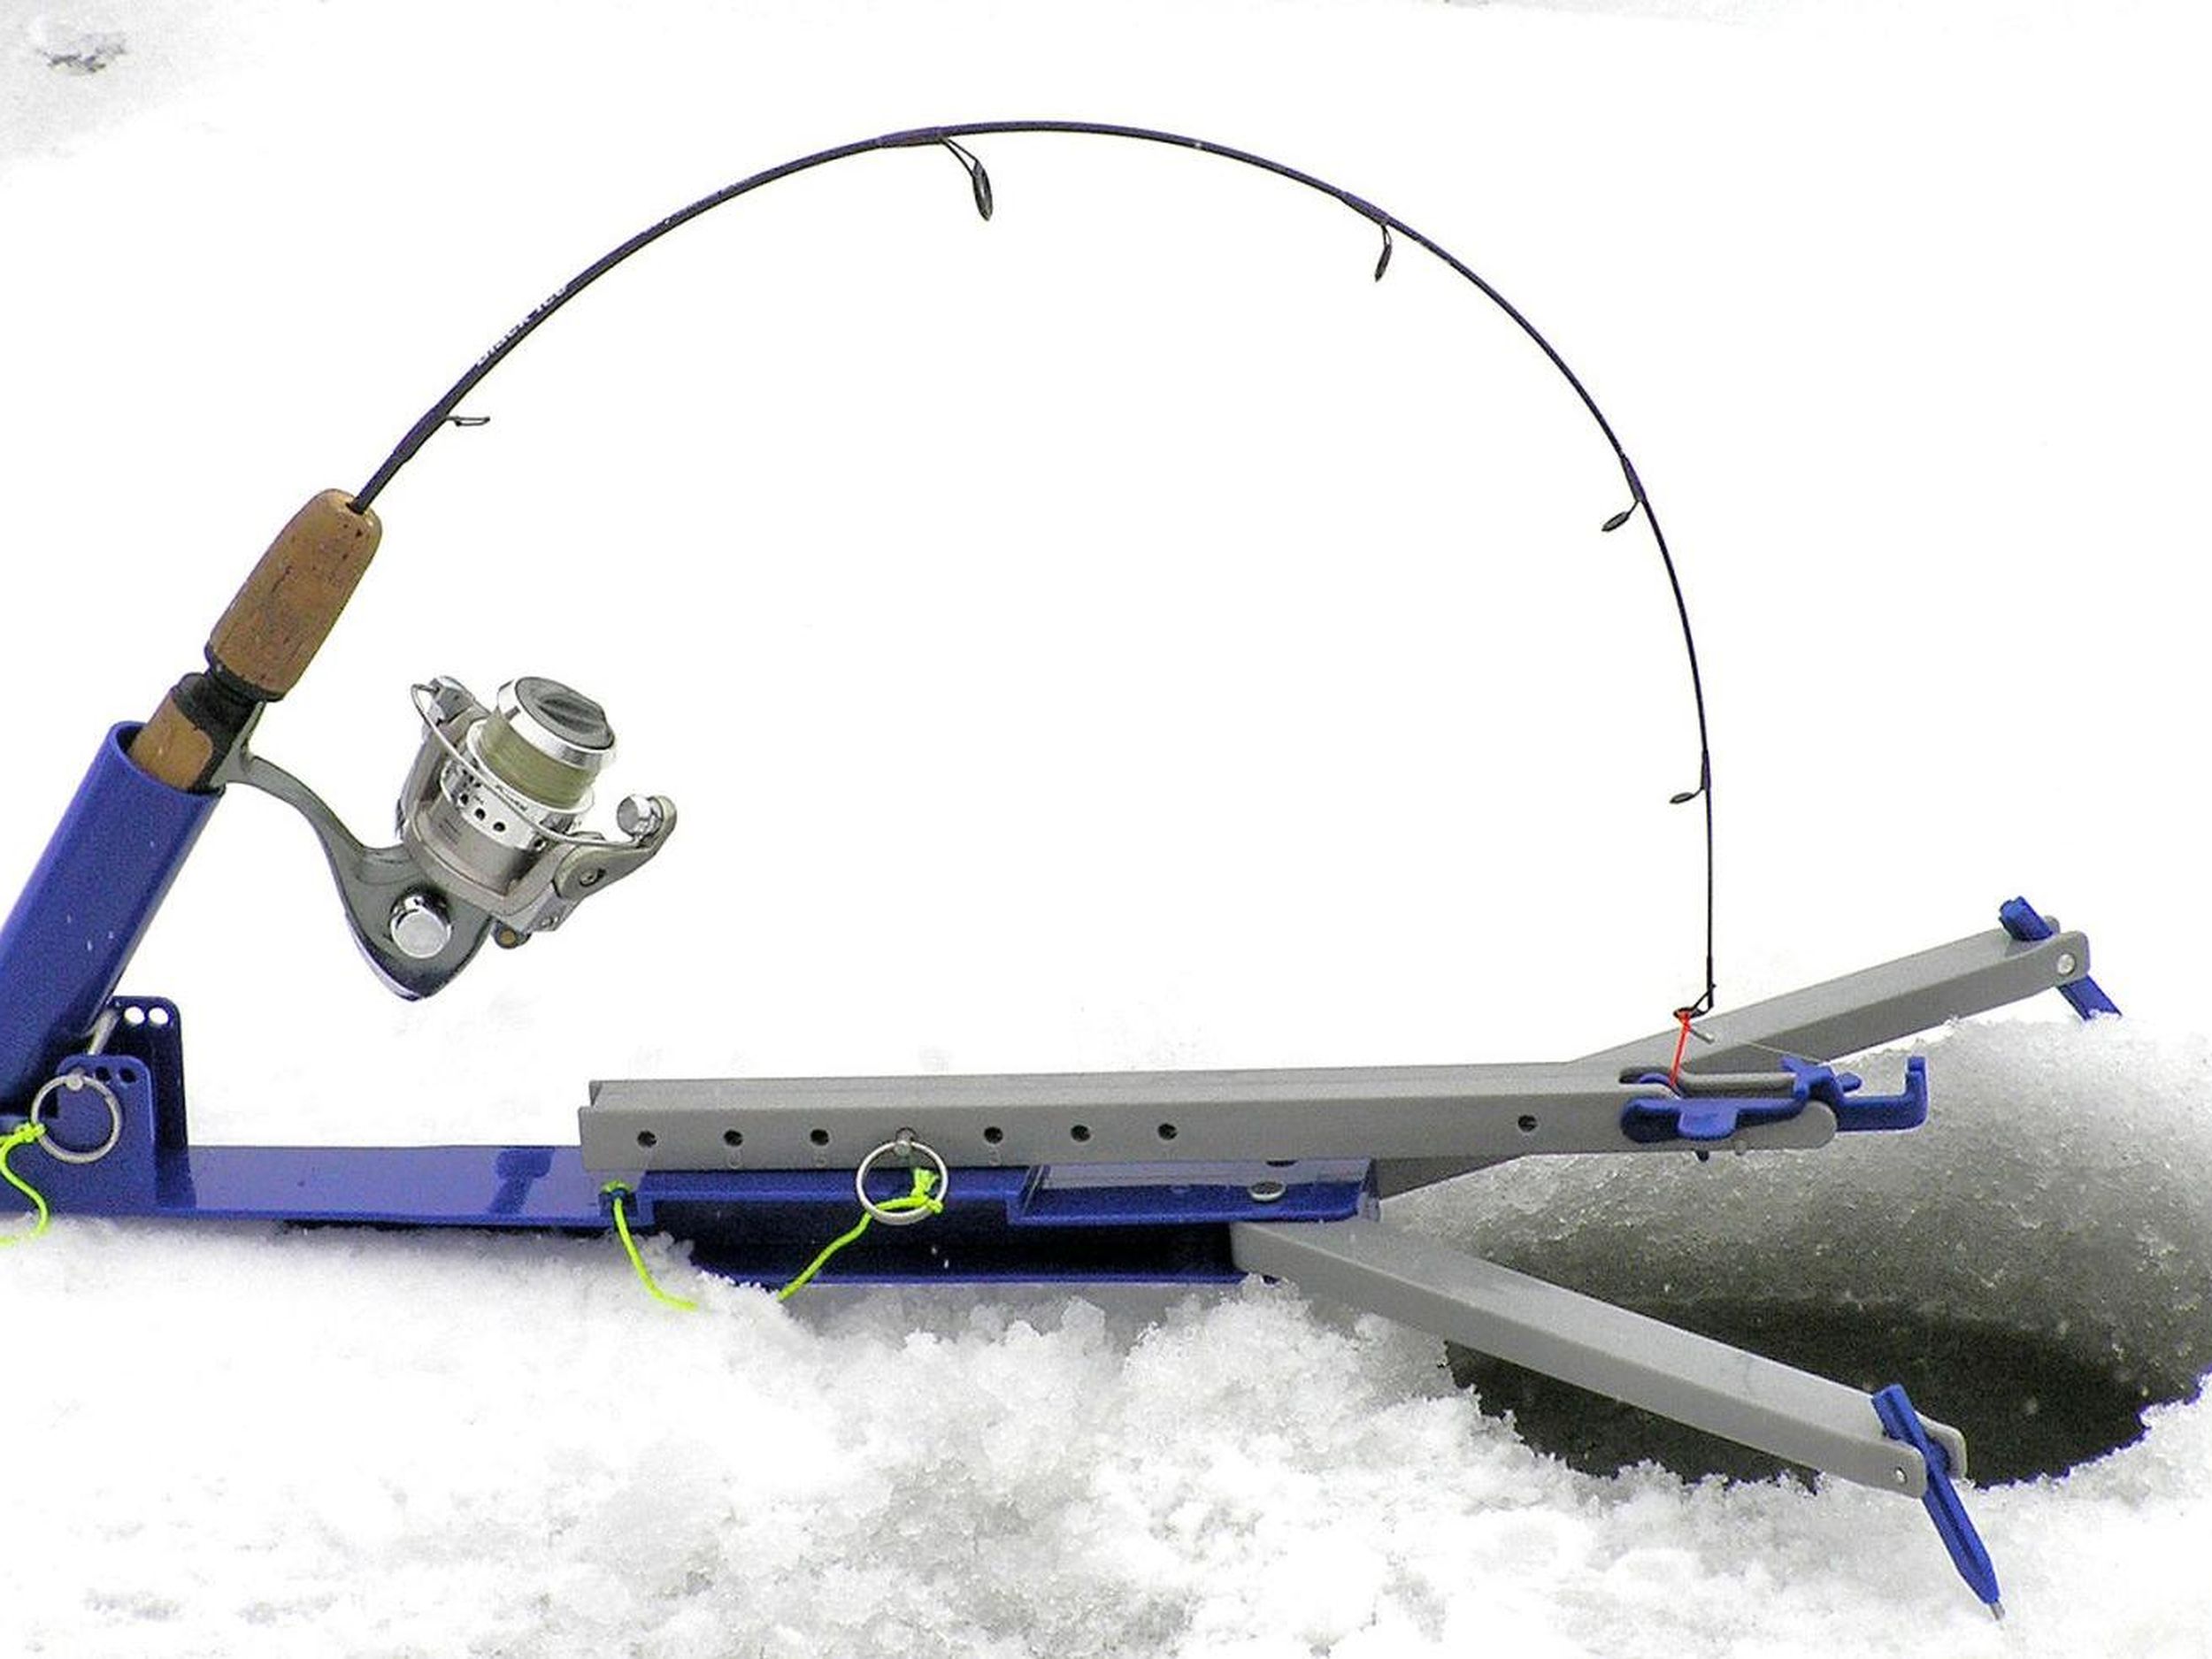 ice fishing tip up, ice fishing tip up Suppliers and Manufacturers at